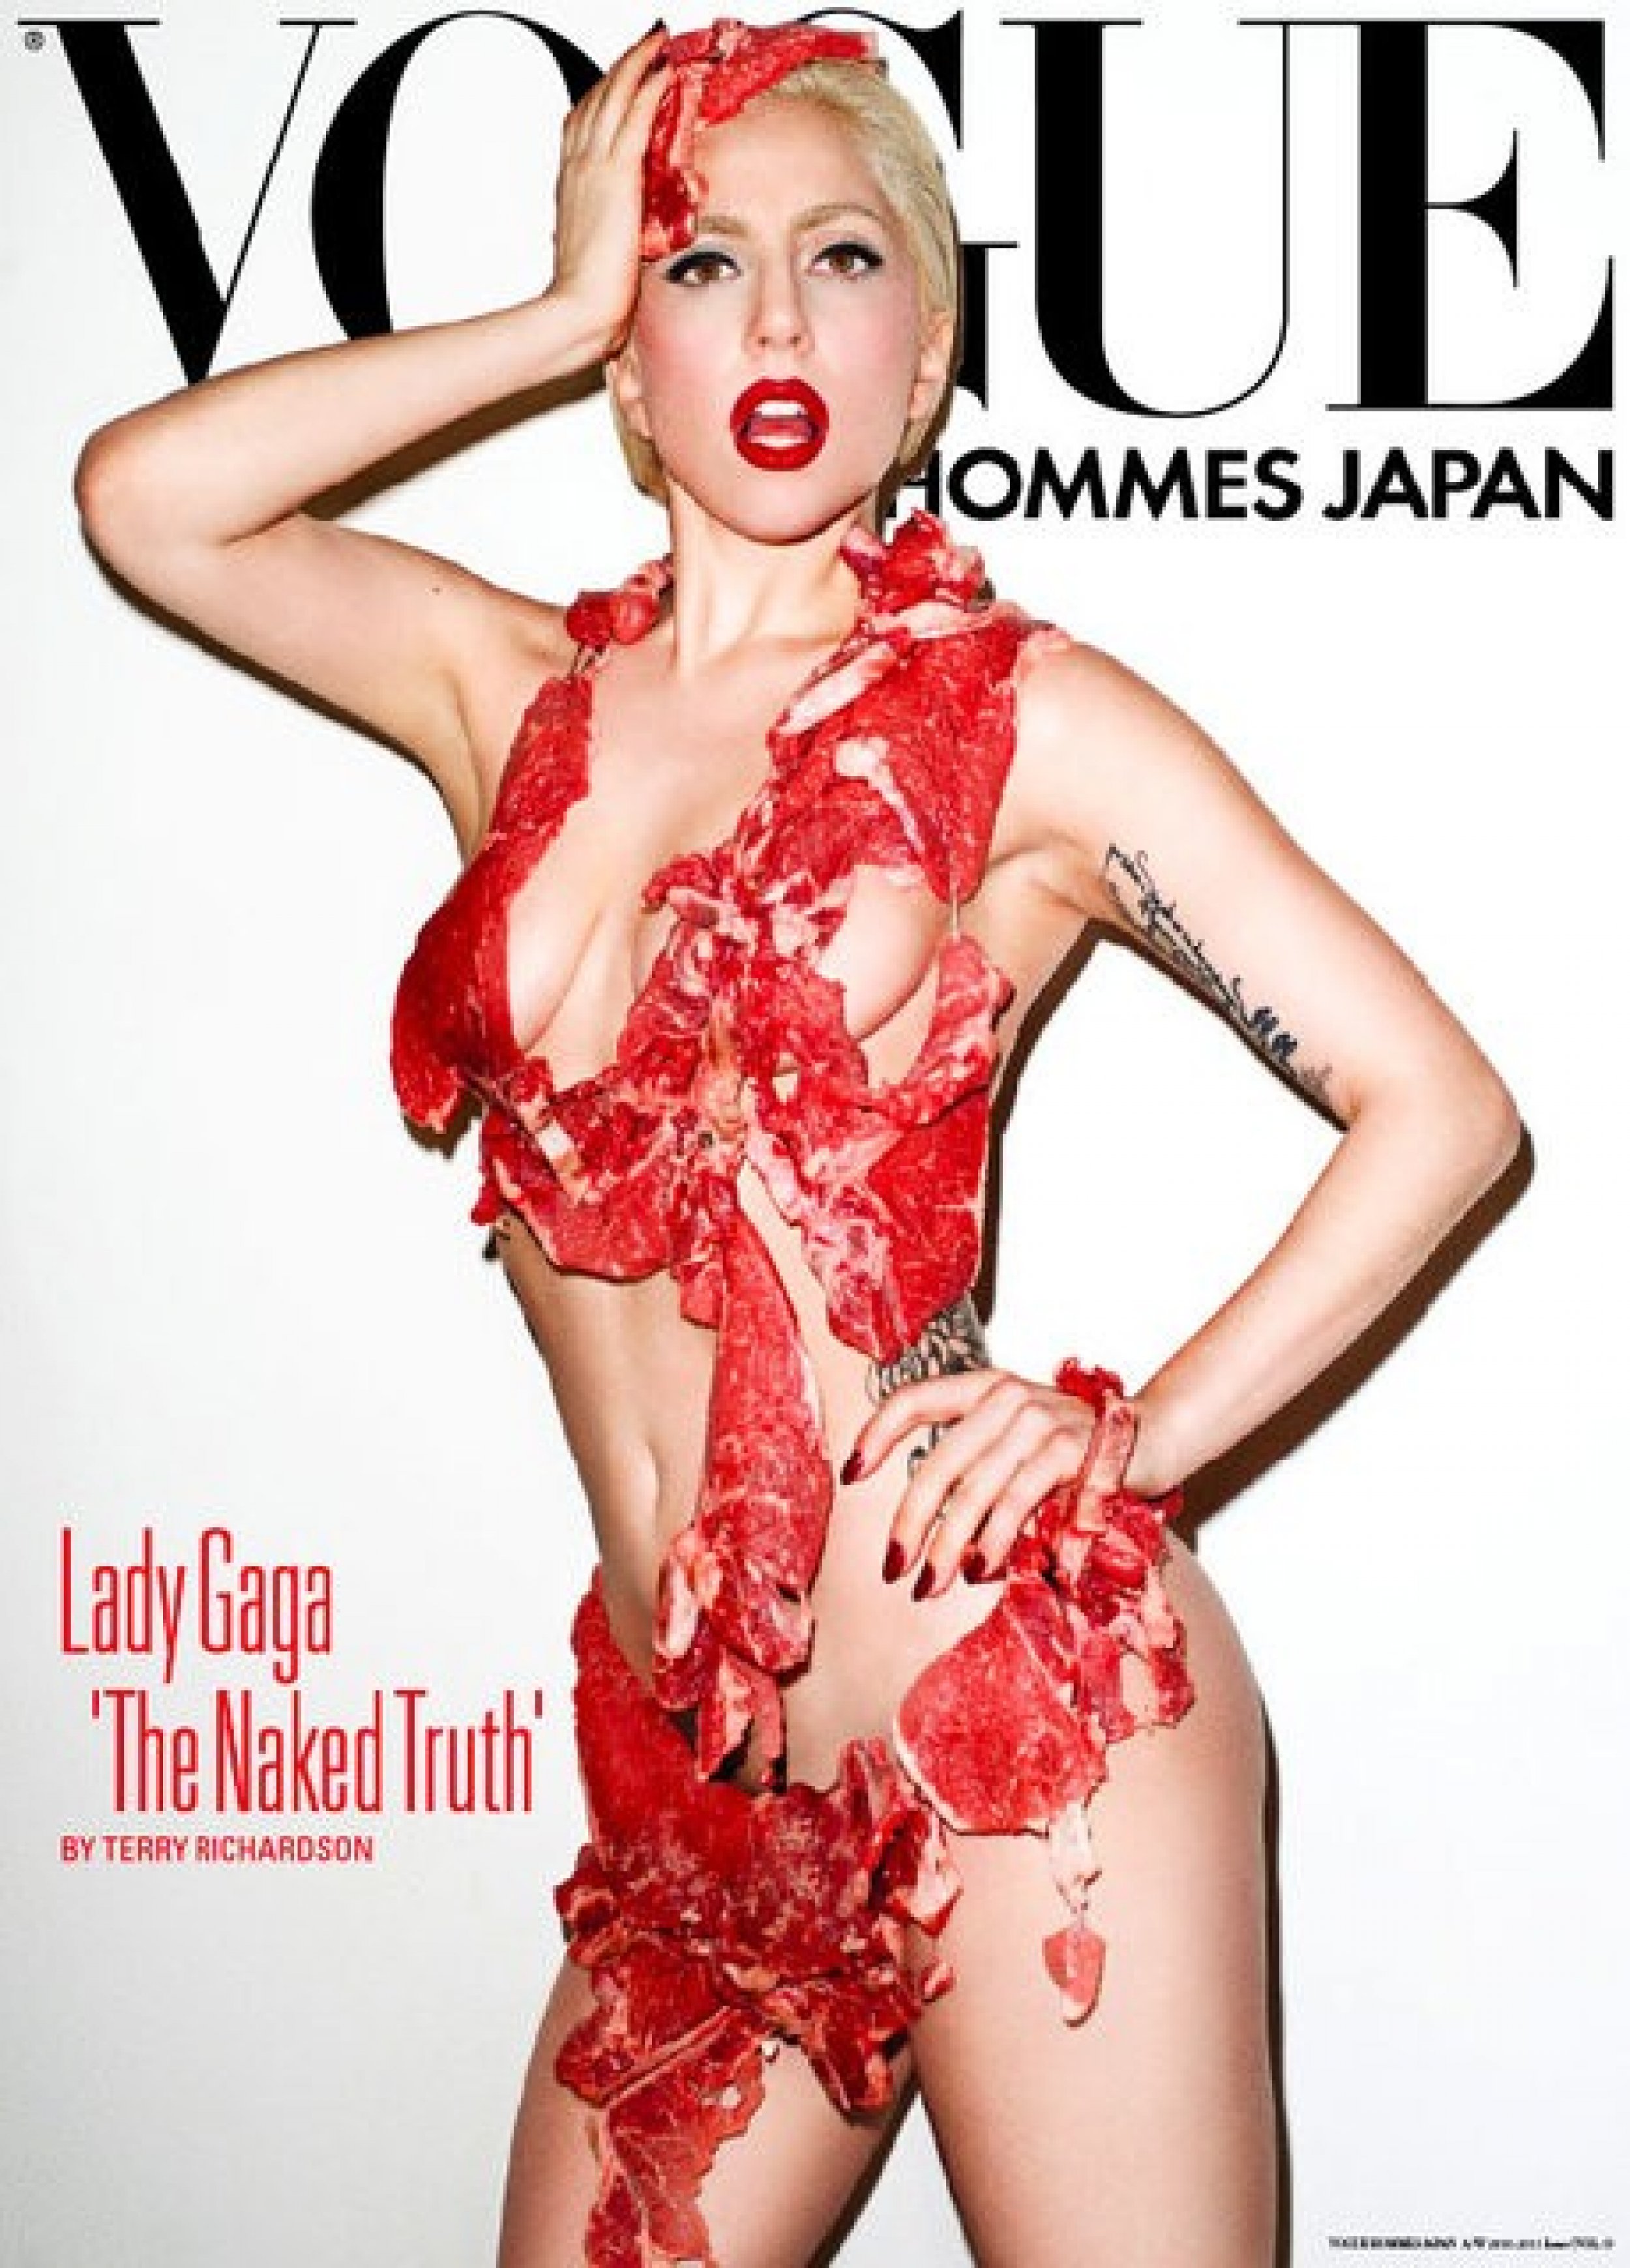 Lady Gaga on the cover of Vogue Hommes Japan